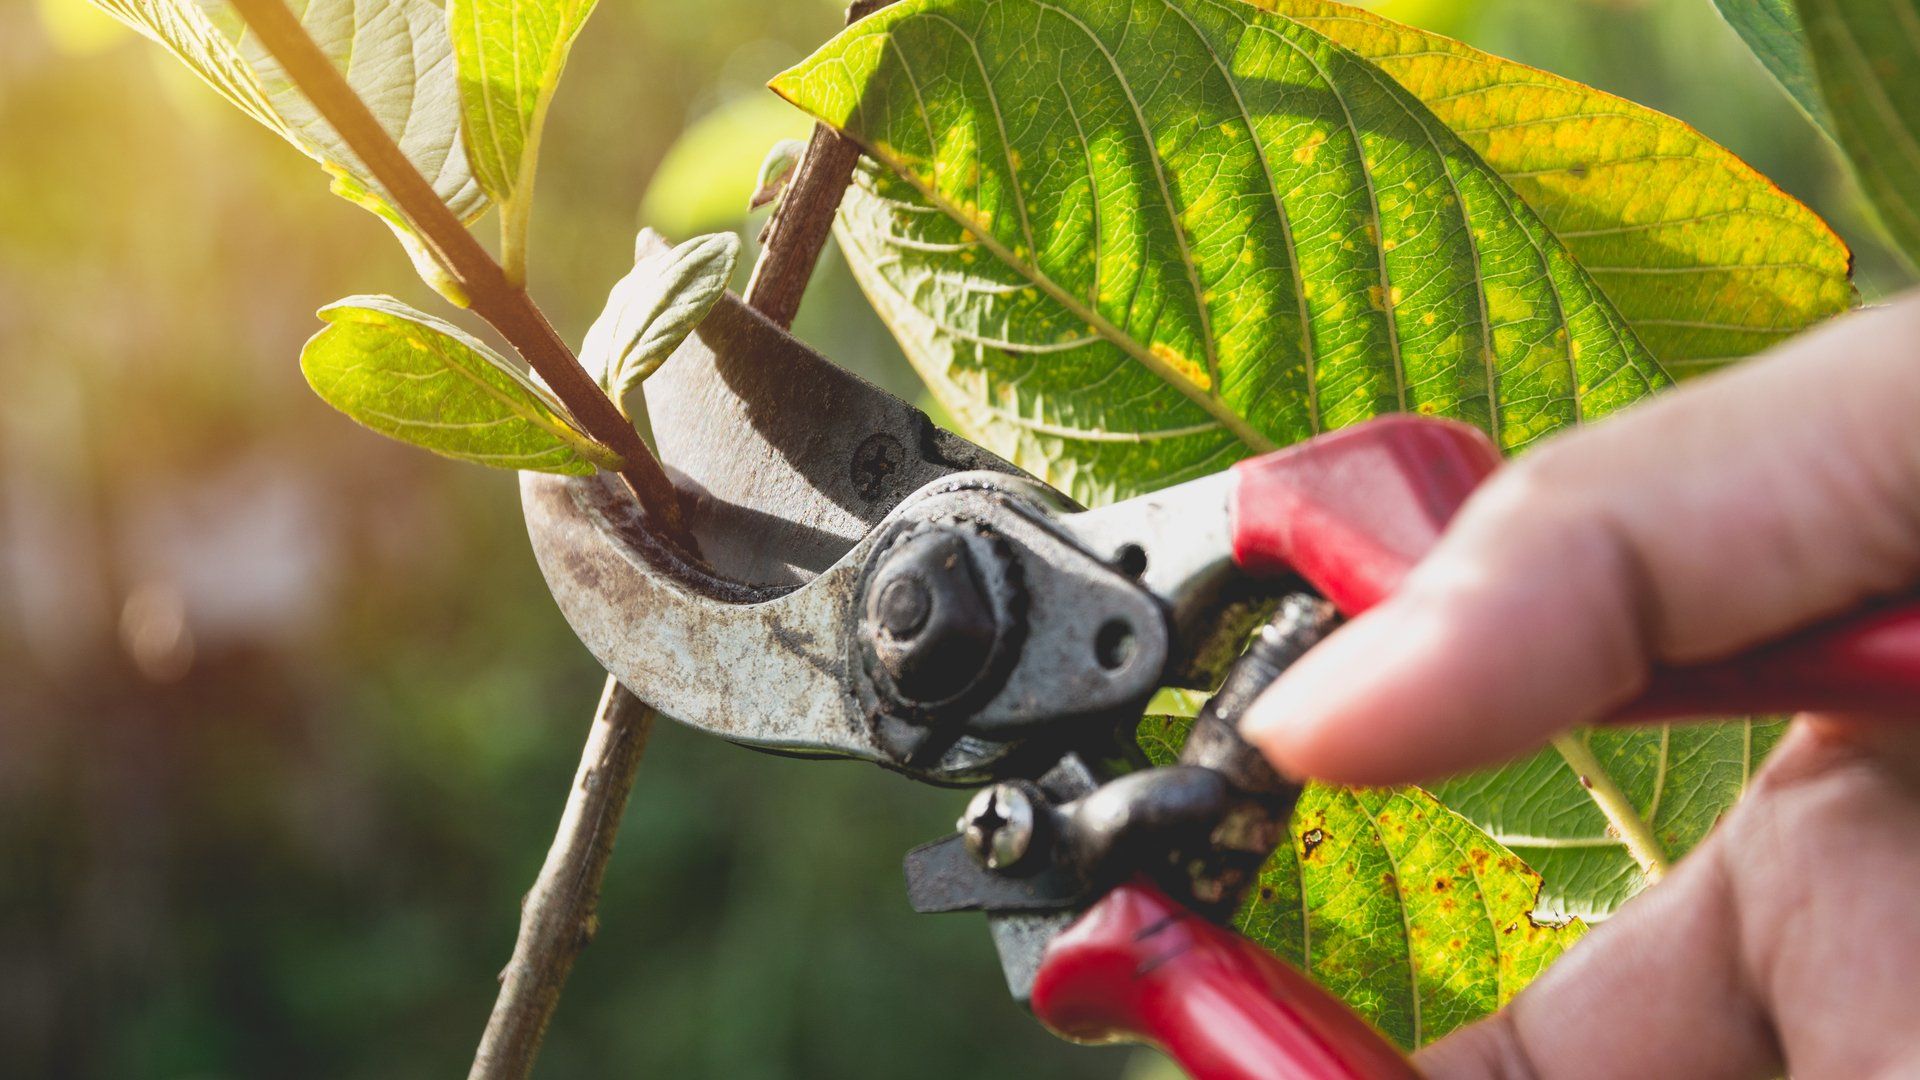 Tree Pruning Service in Southampton, NJ | Edward and Sons Landscaping